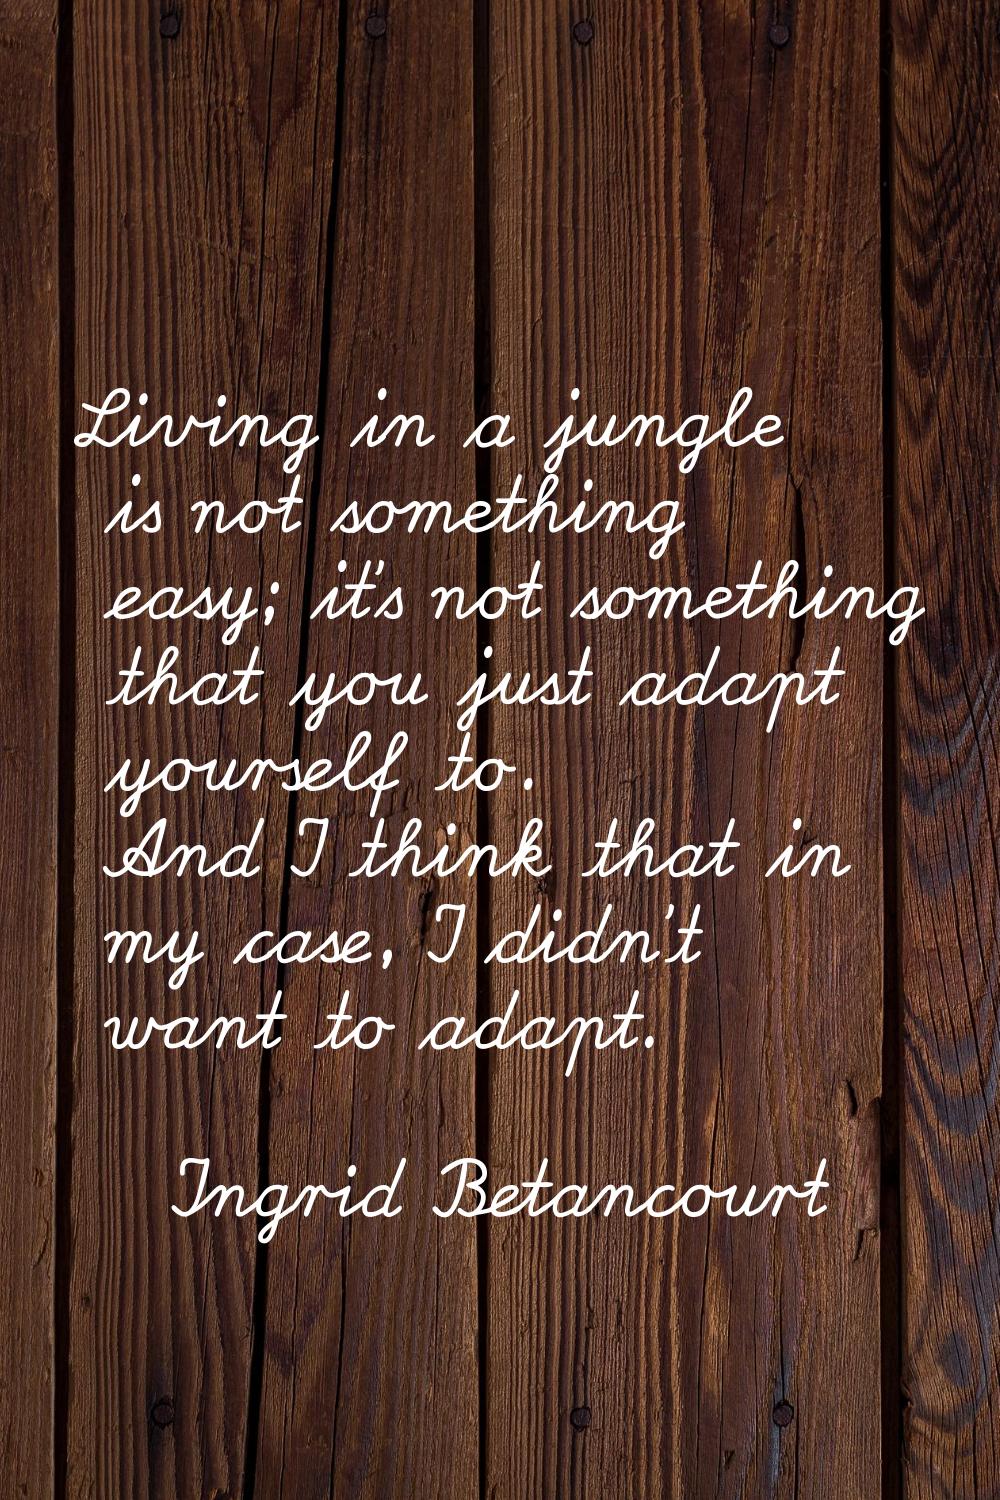 Living in a jungle is not something easy; it's not something that you just adapt yourself to. And I